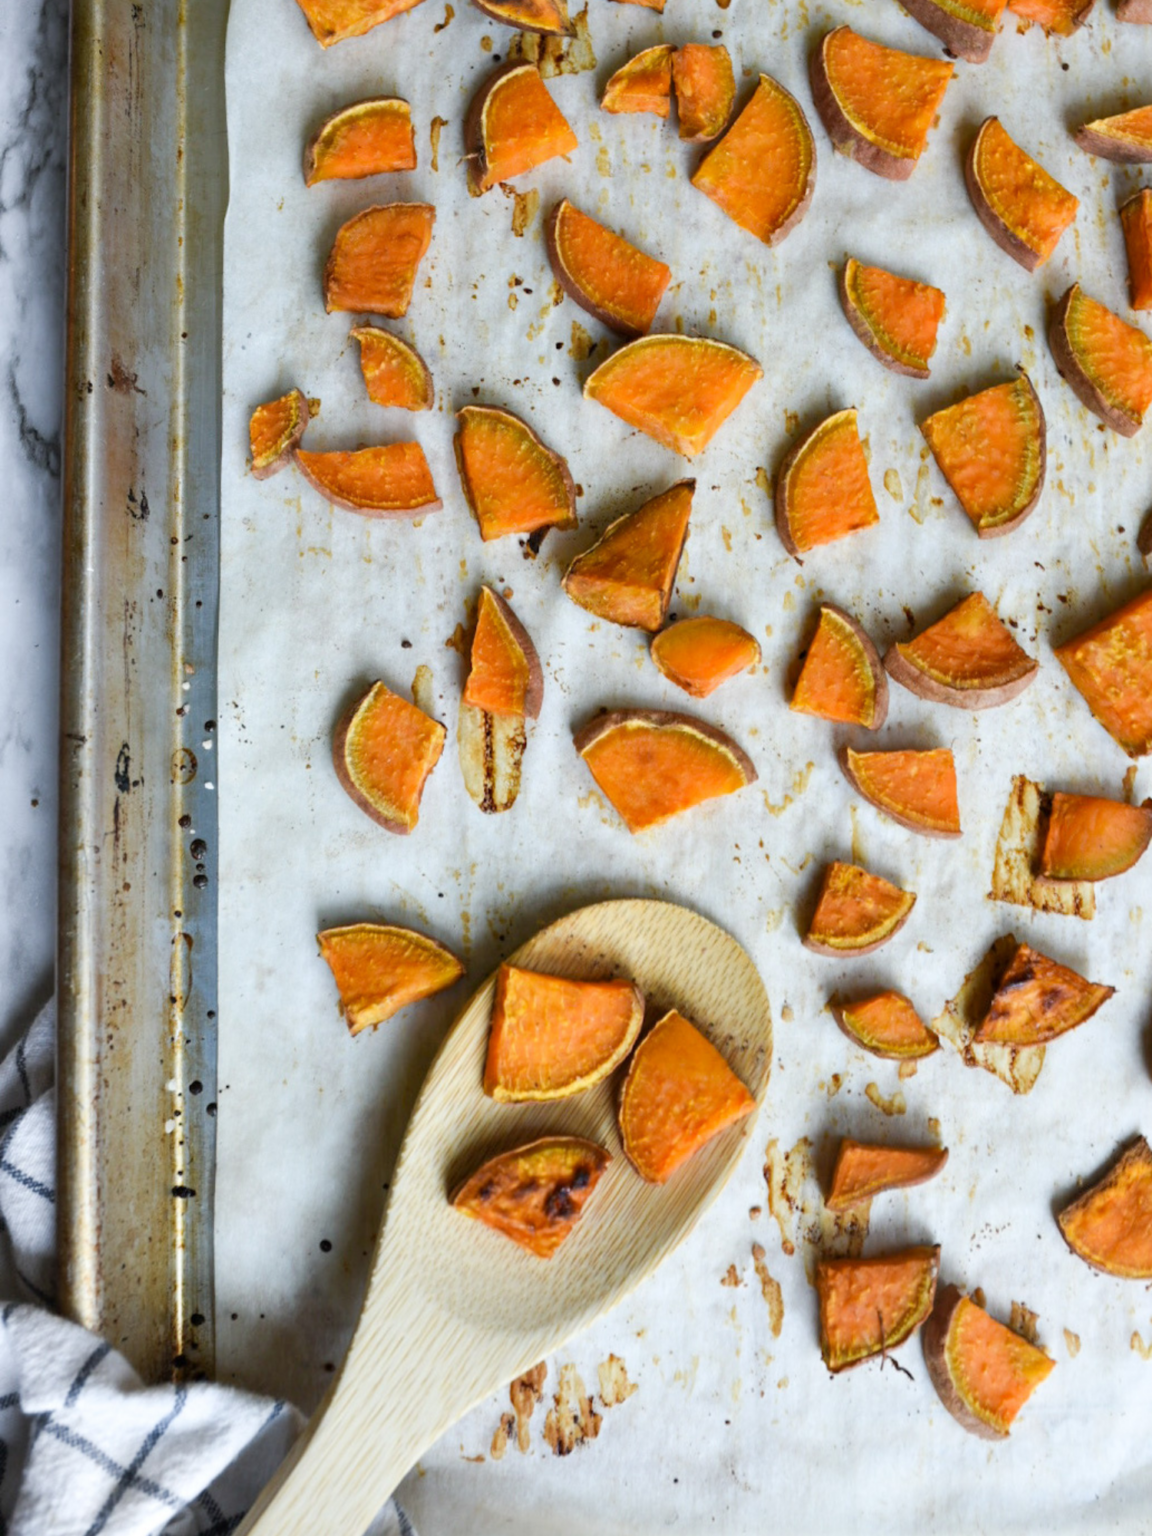 Oil Free Roasted Sweet Potatoes - The GERD Chef